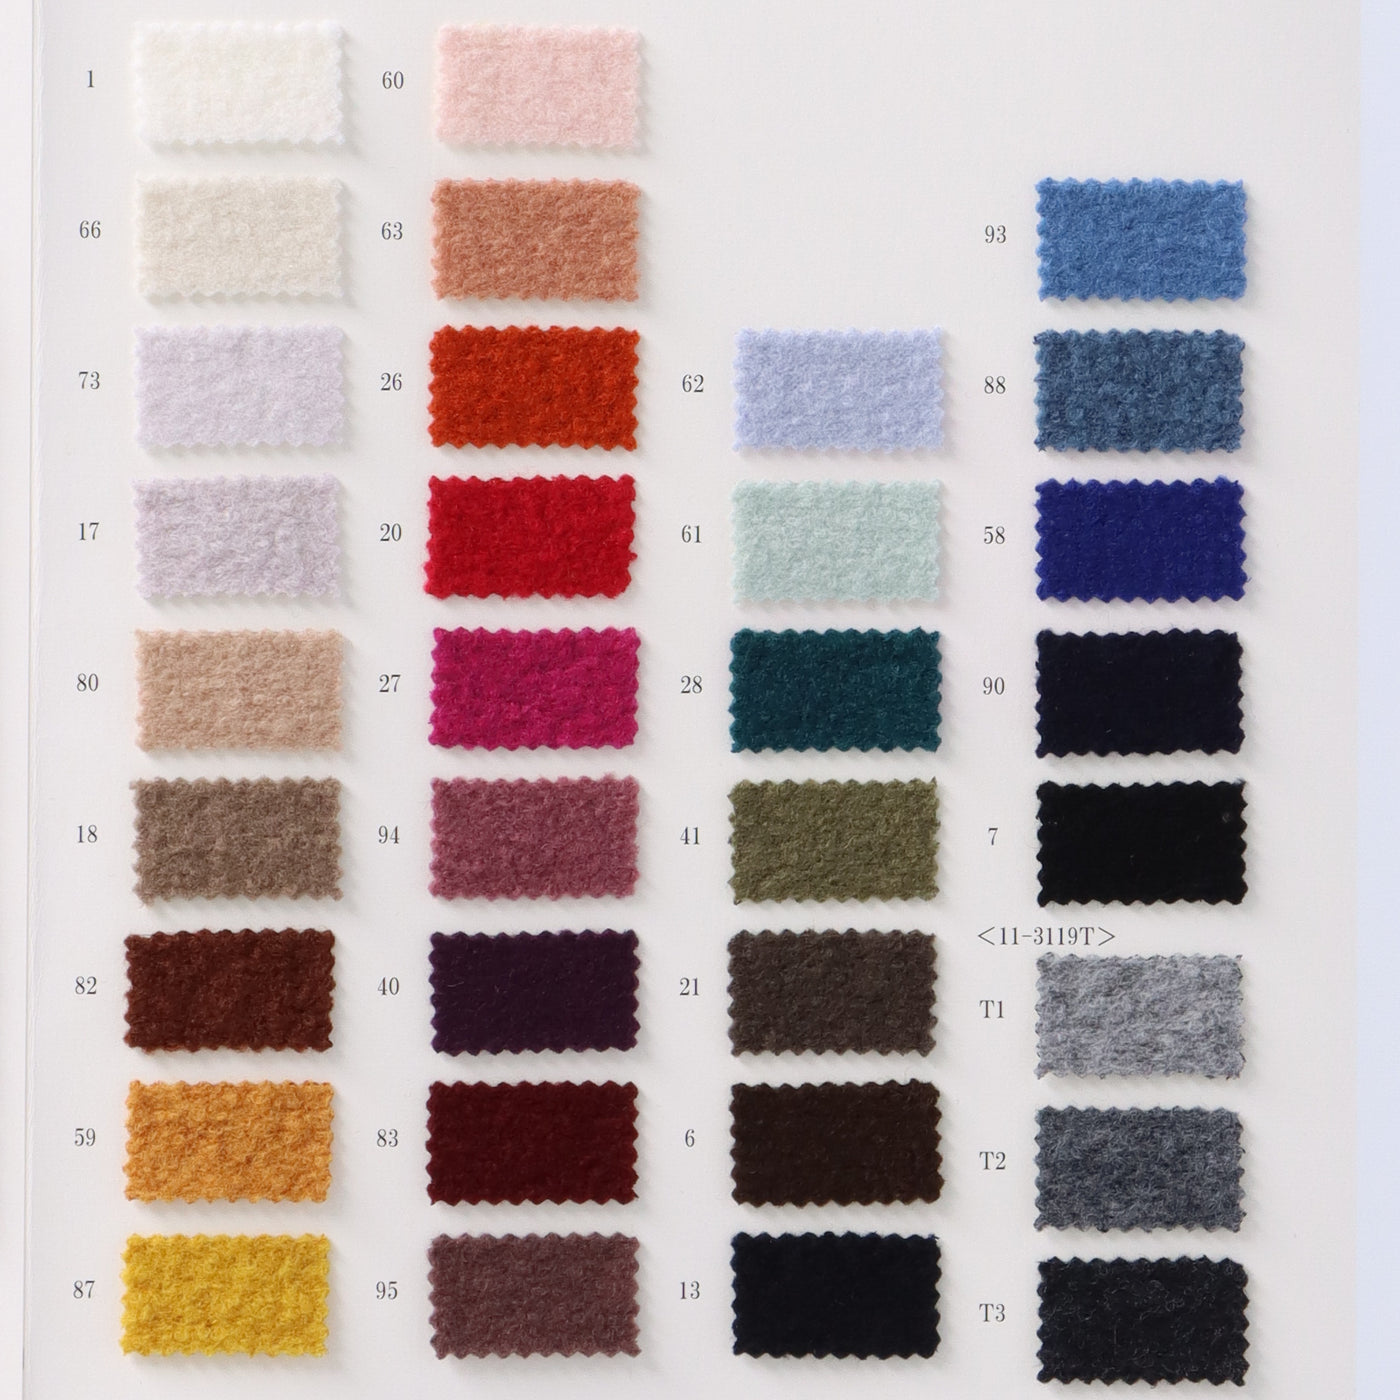 11-3119-swatch_Compressed Wool Boucle